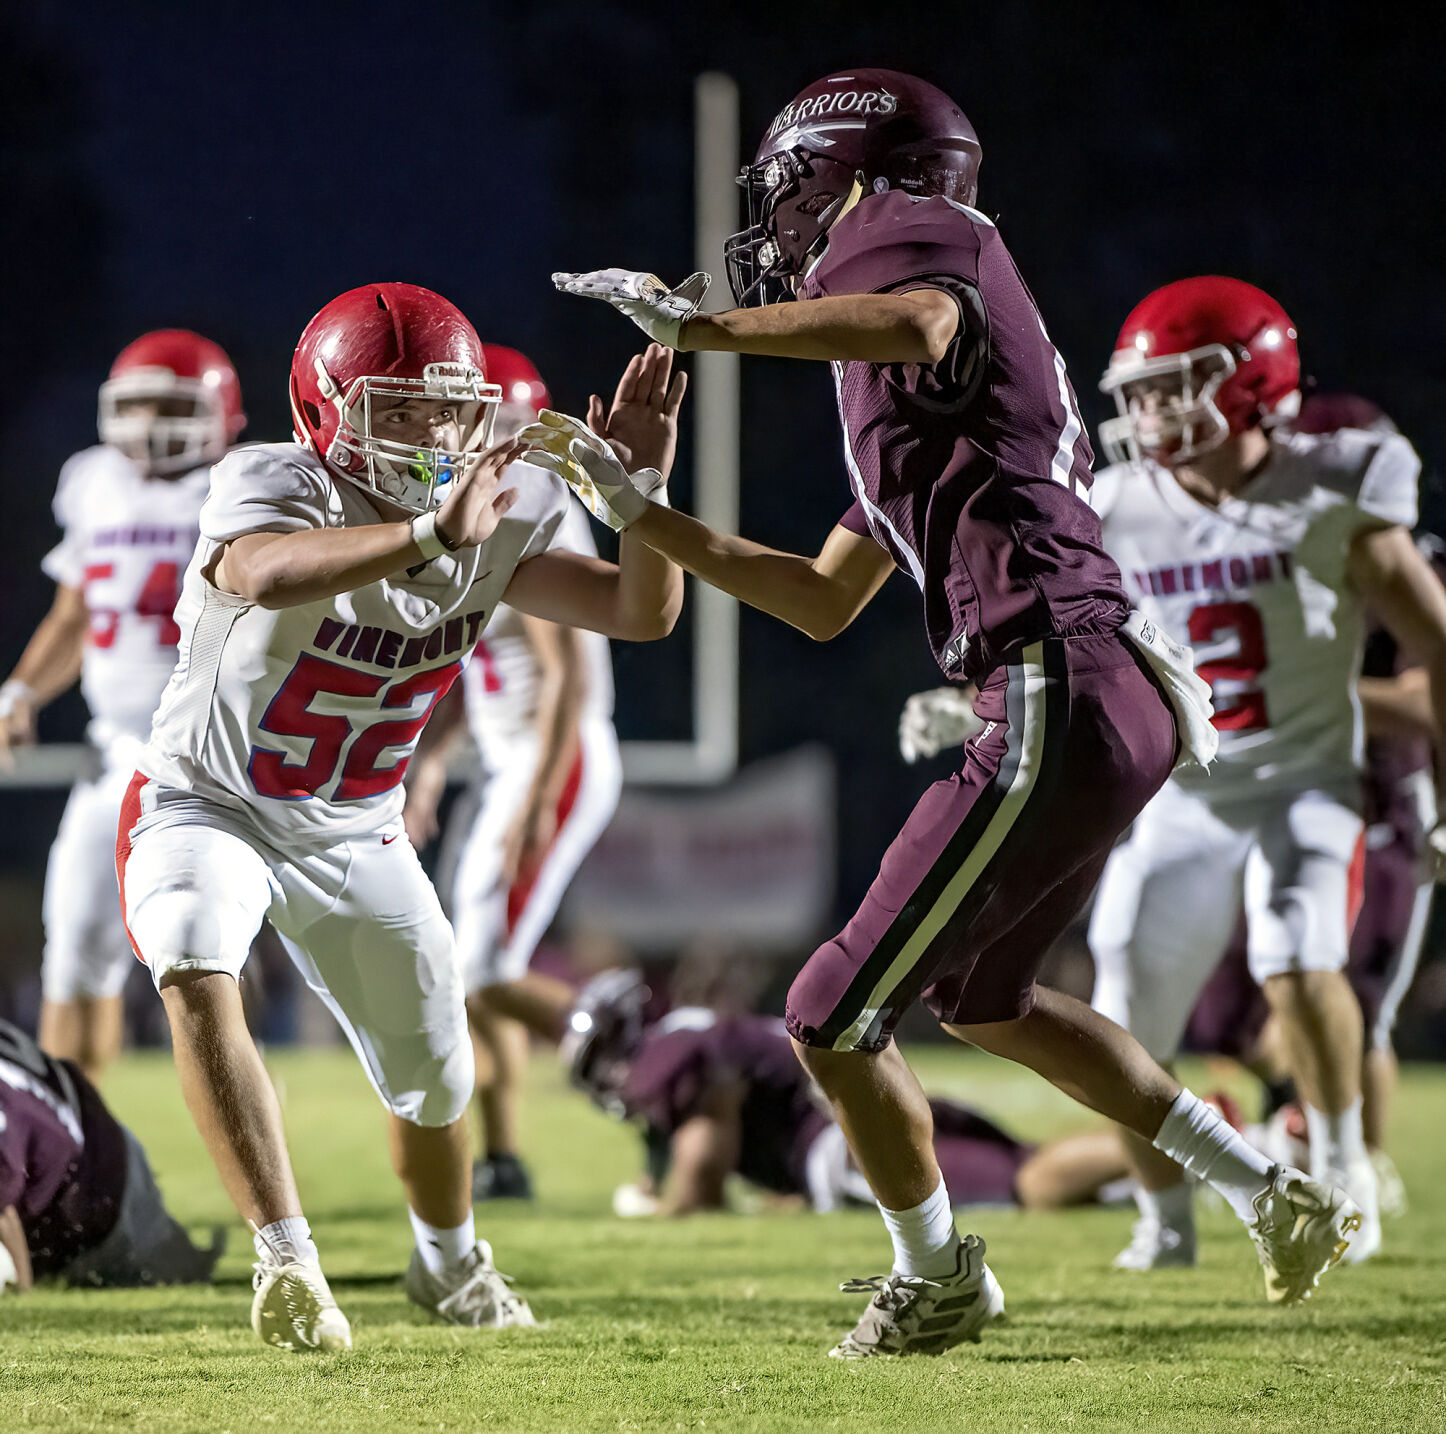 Preview of Week 4 High School Football Games: Key Matchups and Predictions